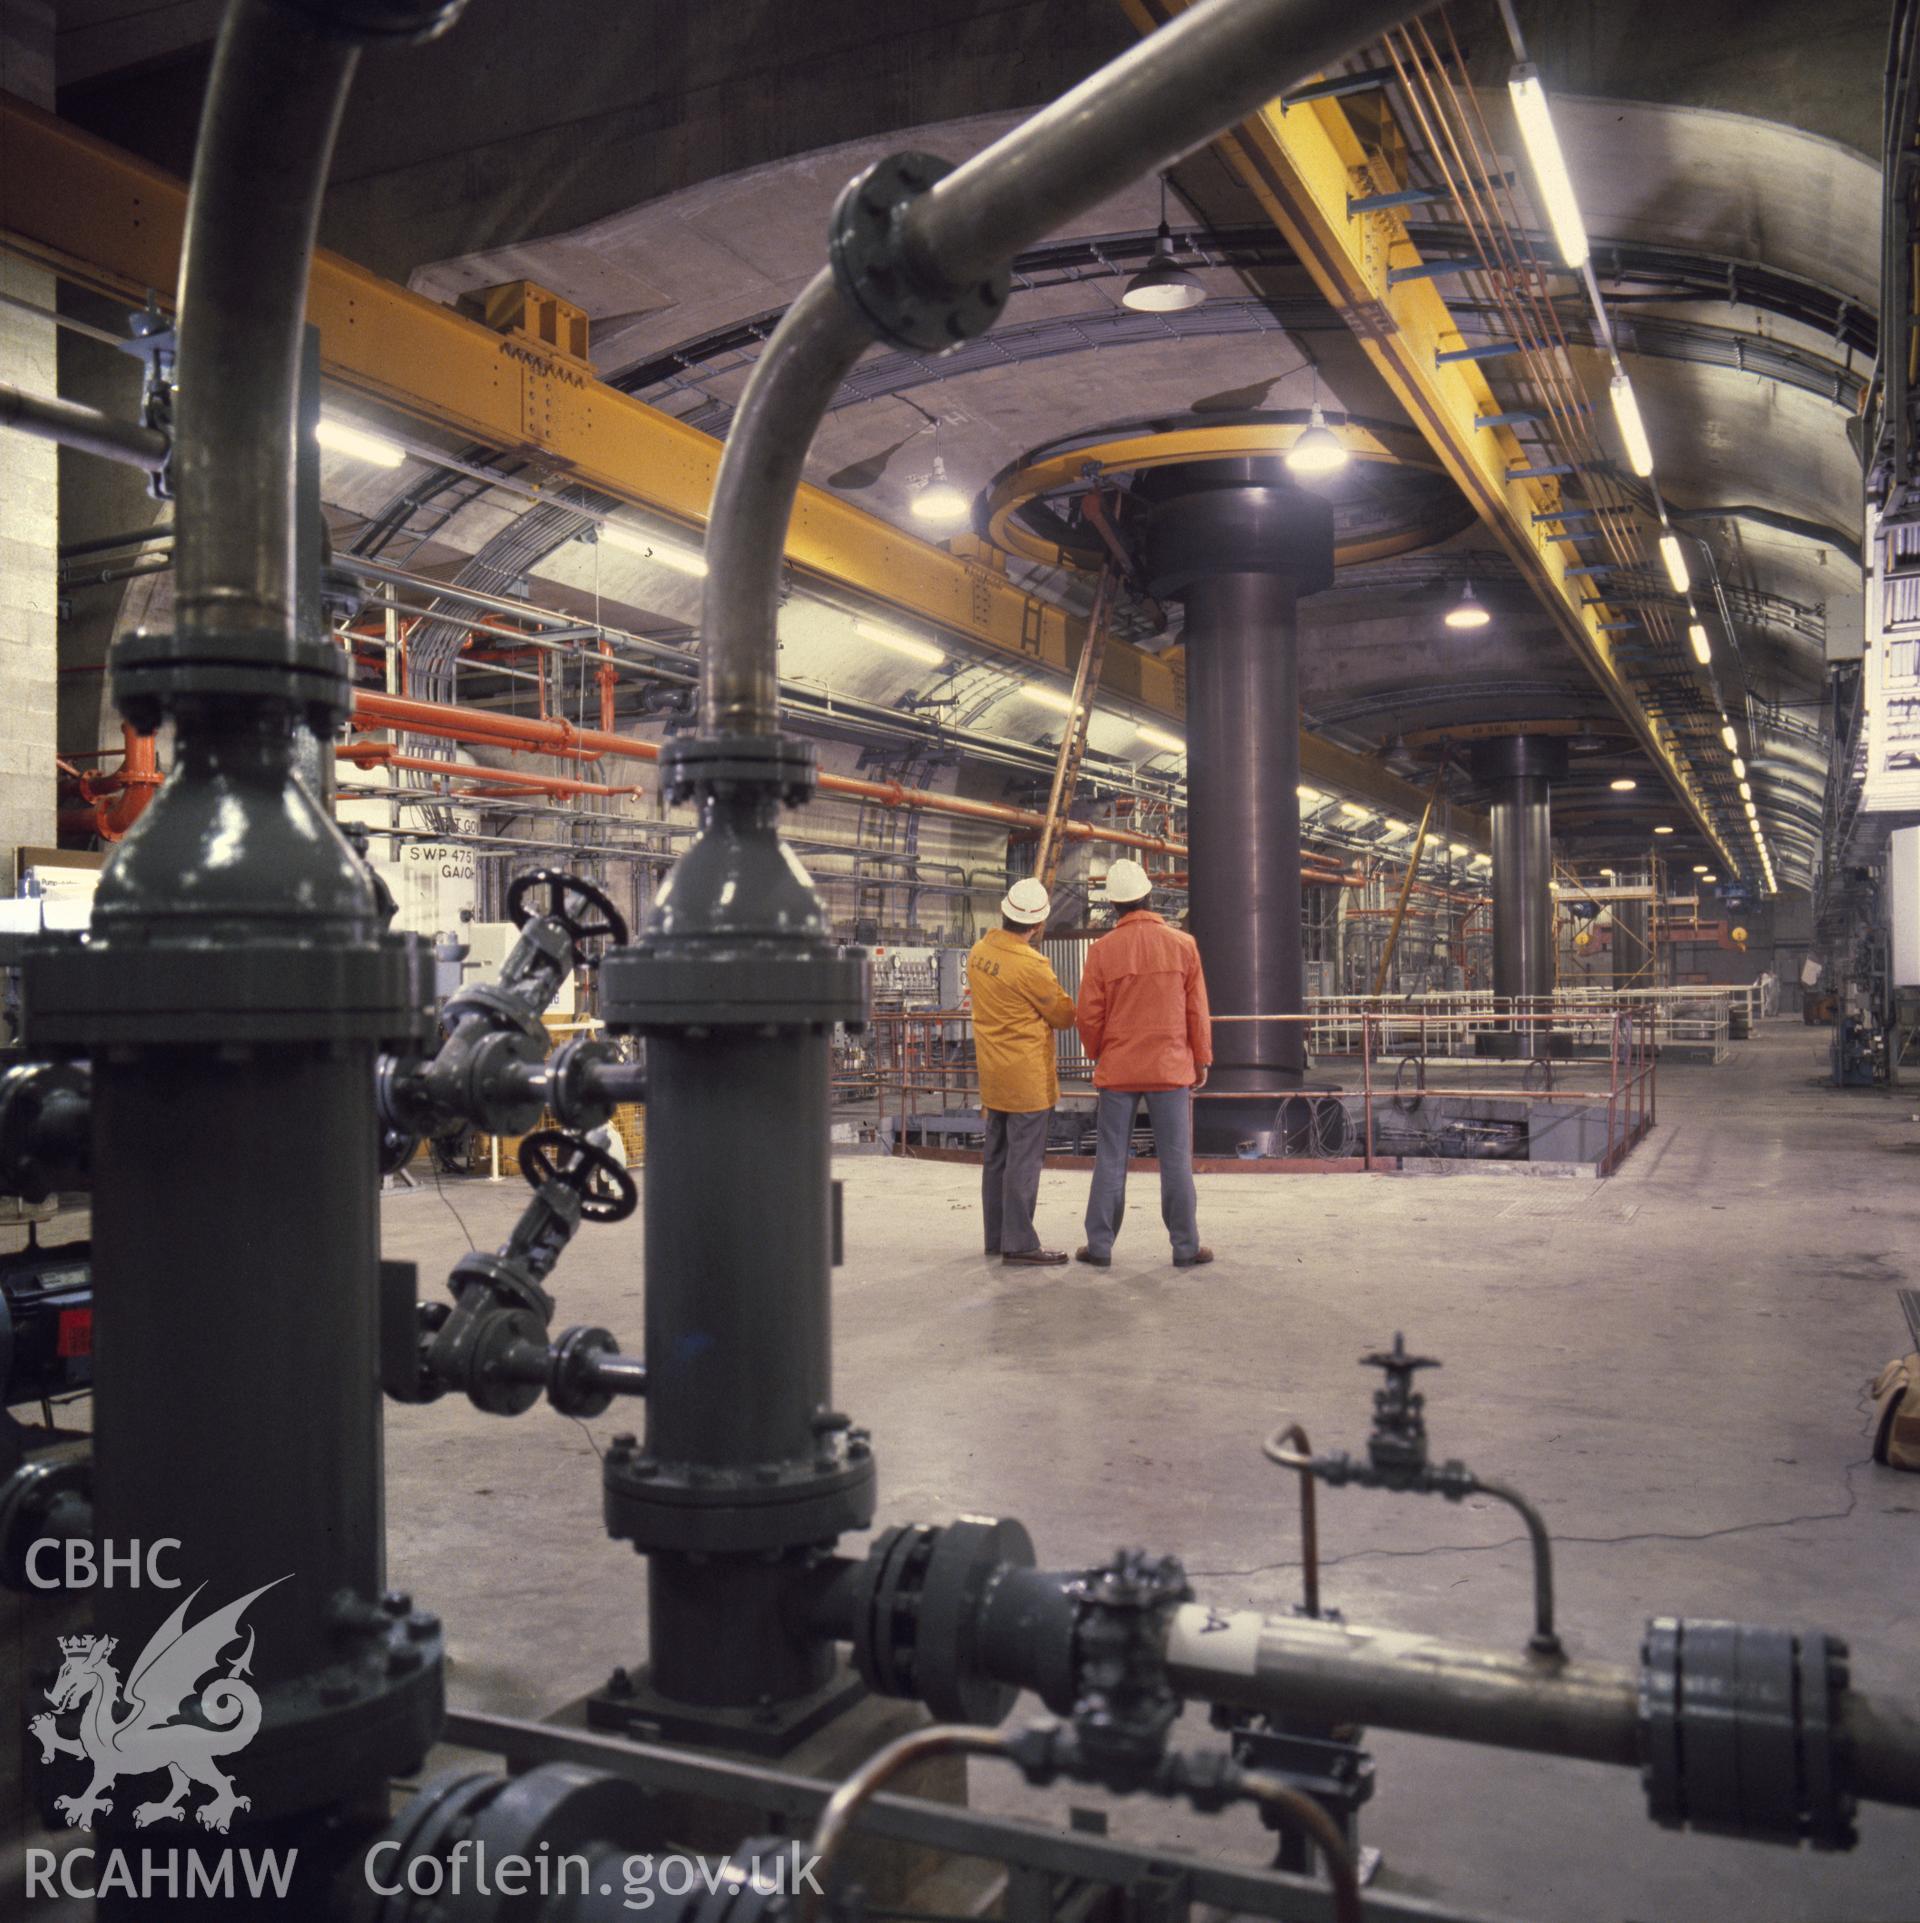 1 colour transparency showing interior of the generating hall at Dinorwig Power Station; collated by the former Central Office of Information.